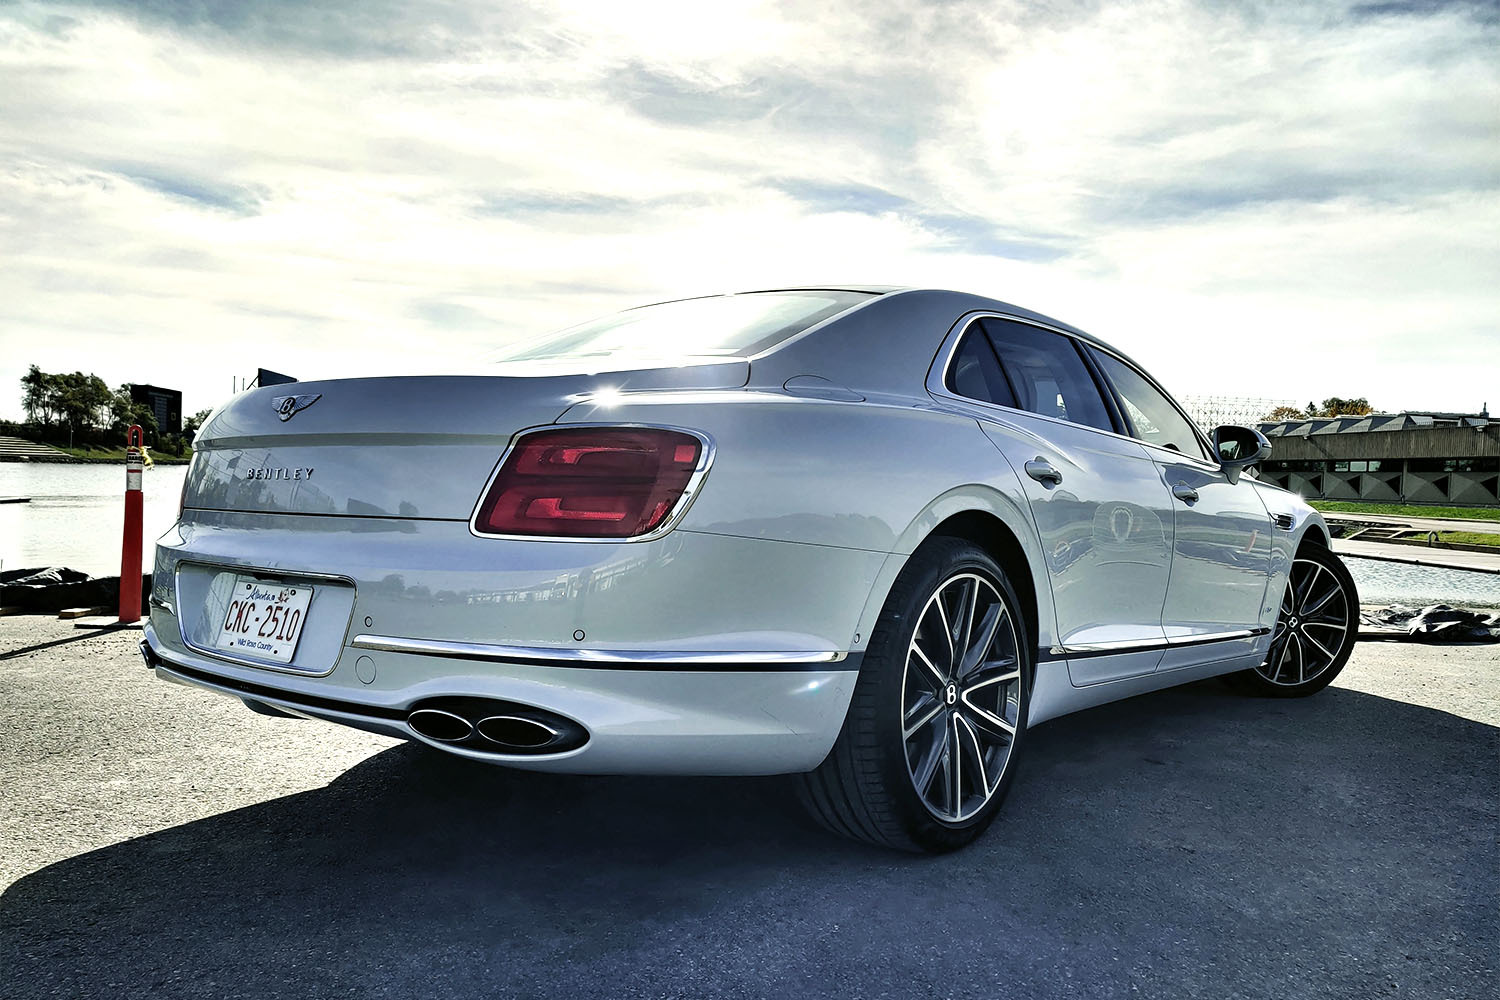 The back end of the 2022 Bentley Flying Spur in white